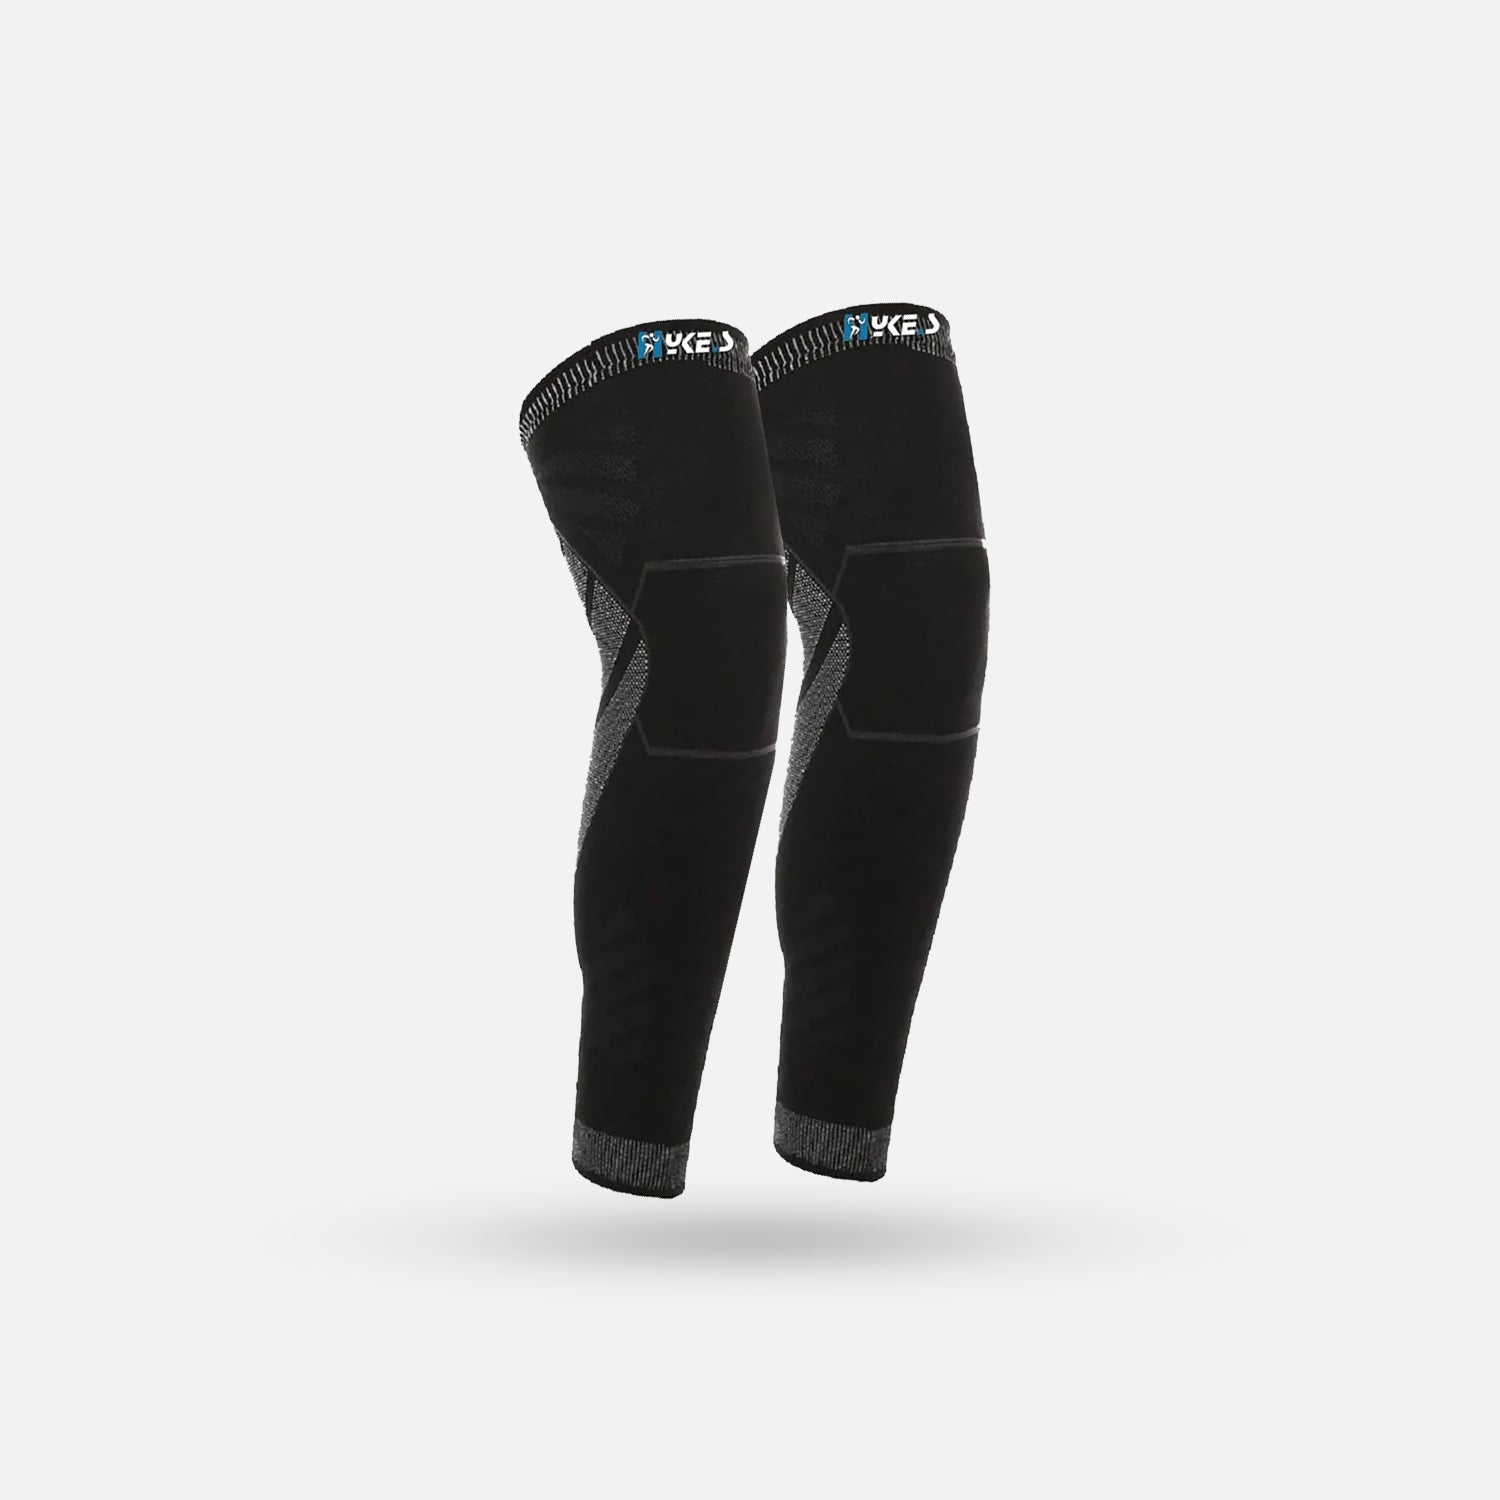 Knee and Calf Compression Sleeves | Full Leg Sleeves